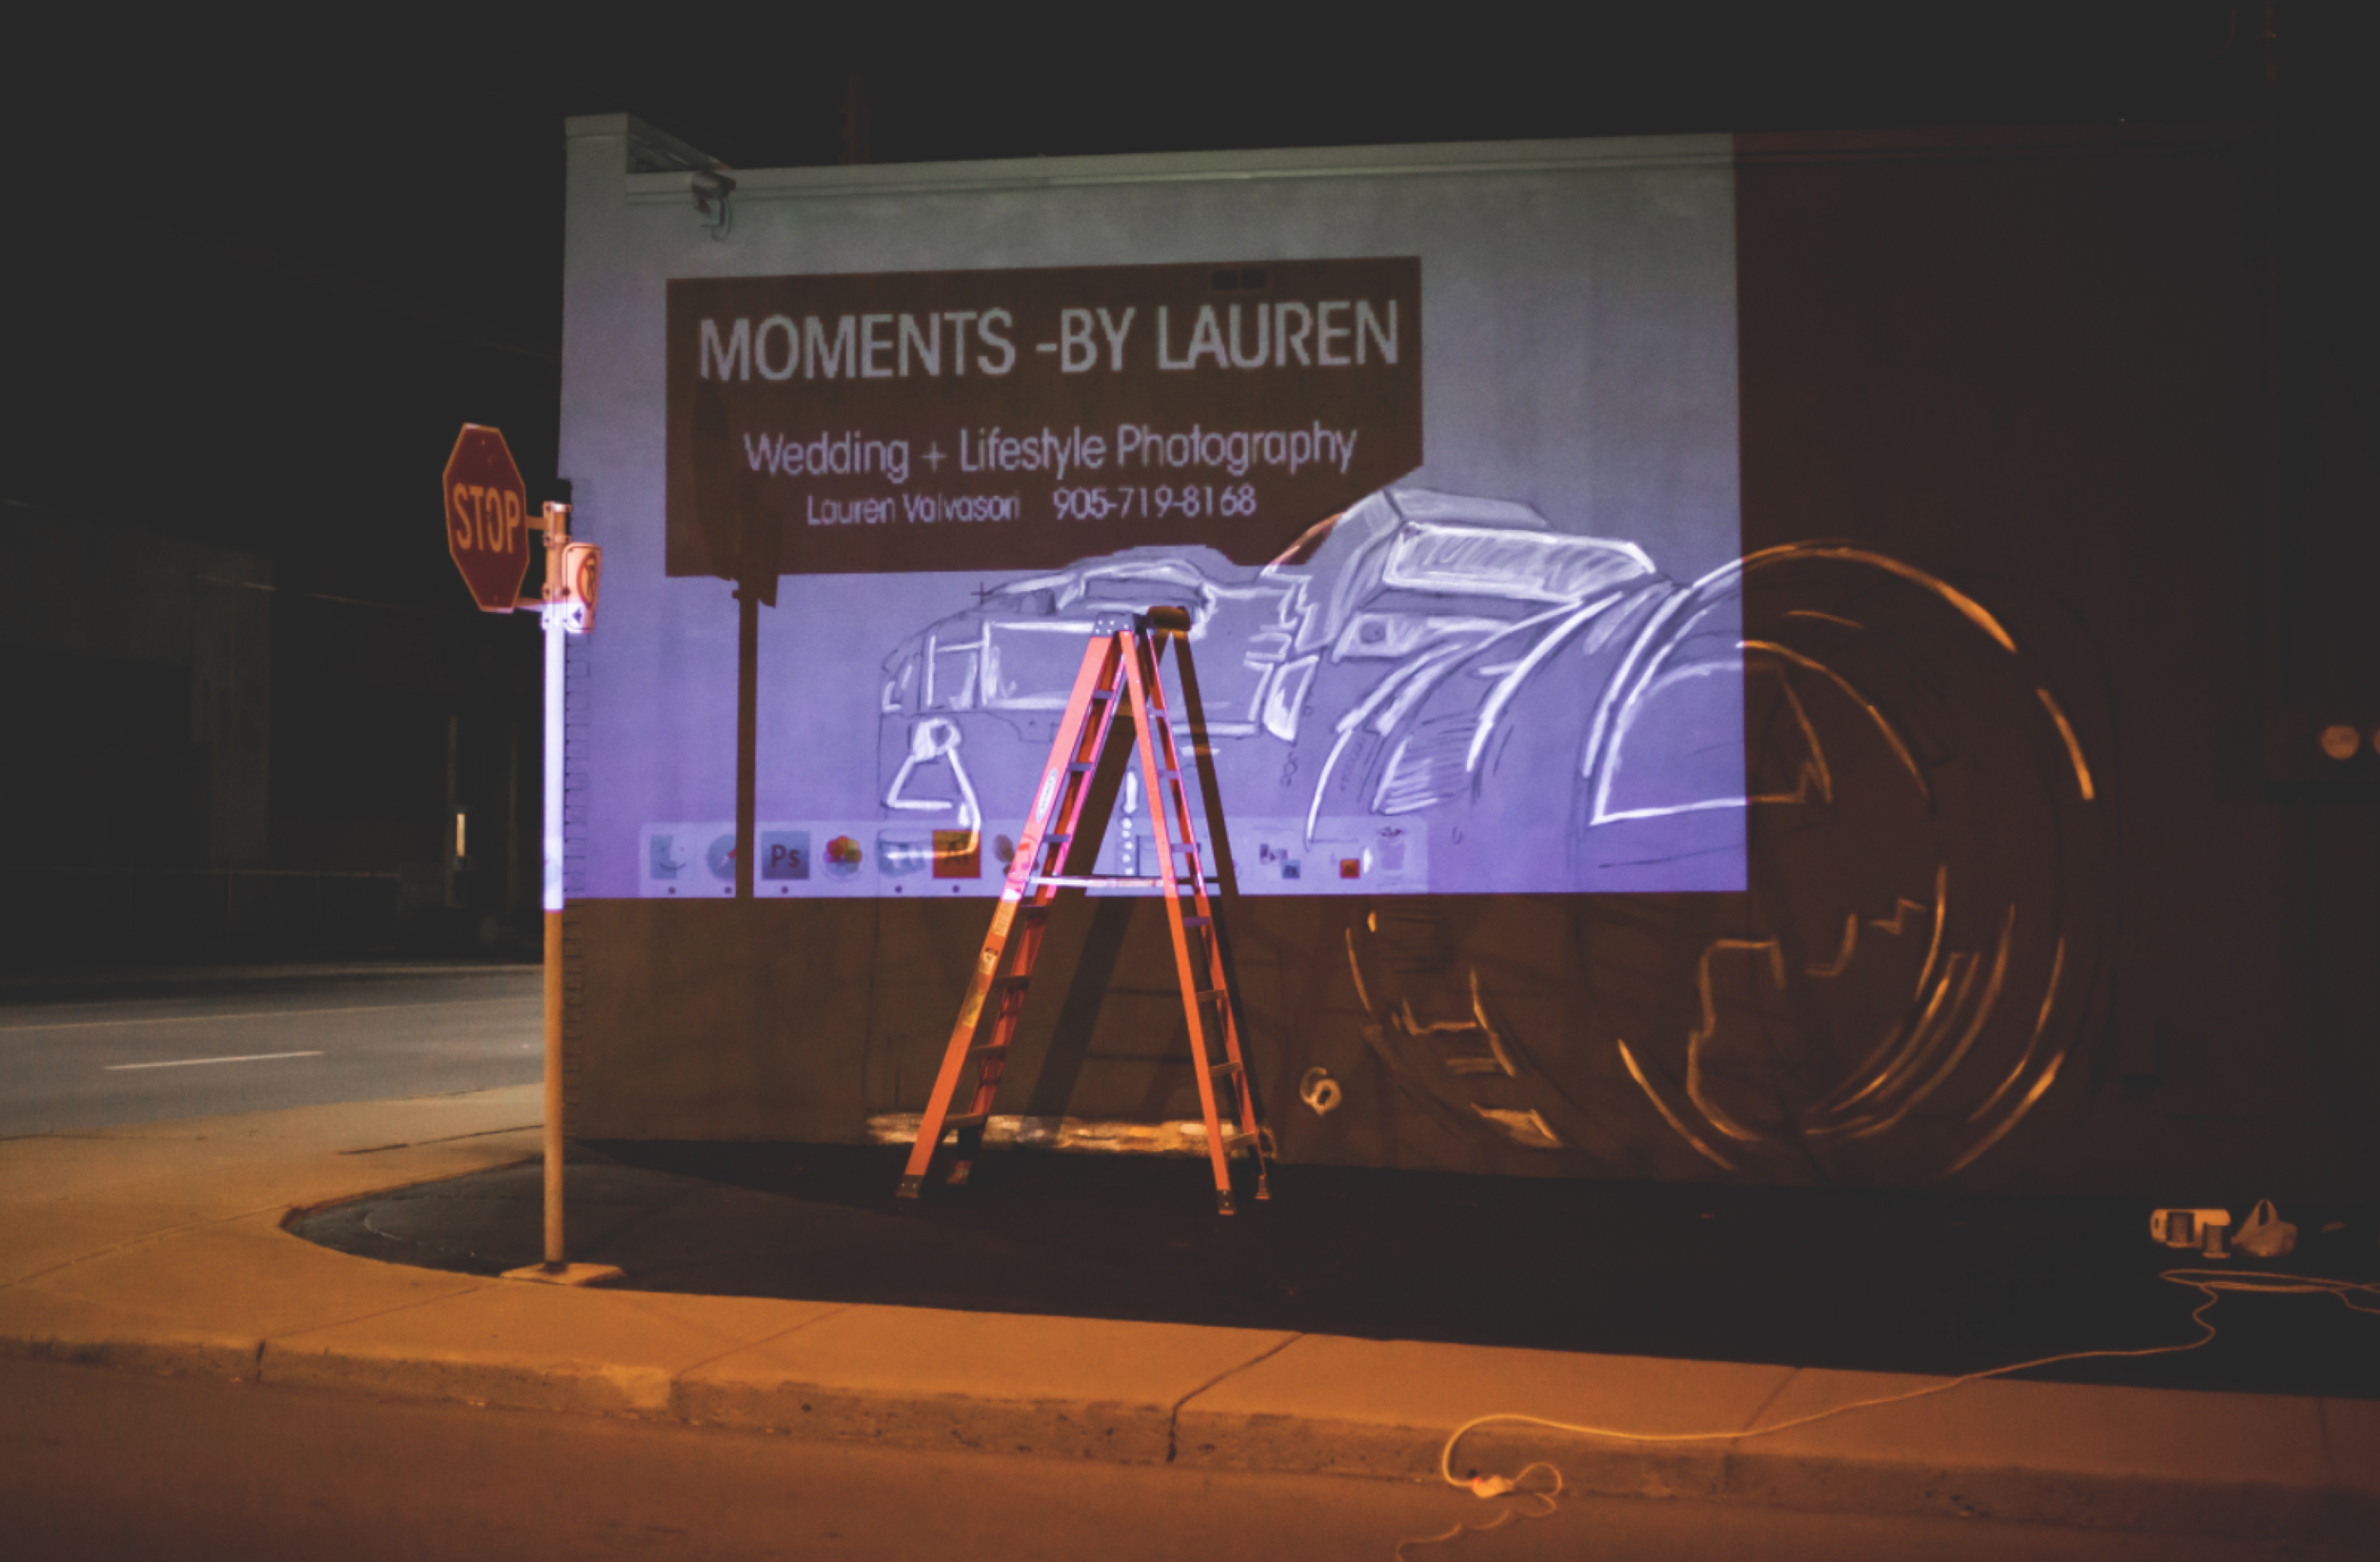 Moments-by-Lauren-Camera-Mural-Claire-Hall-Design-Photo-3.png